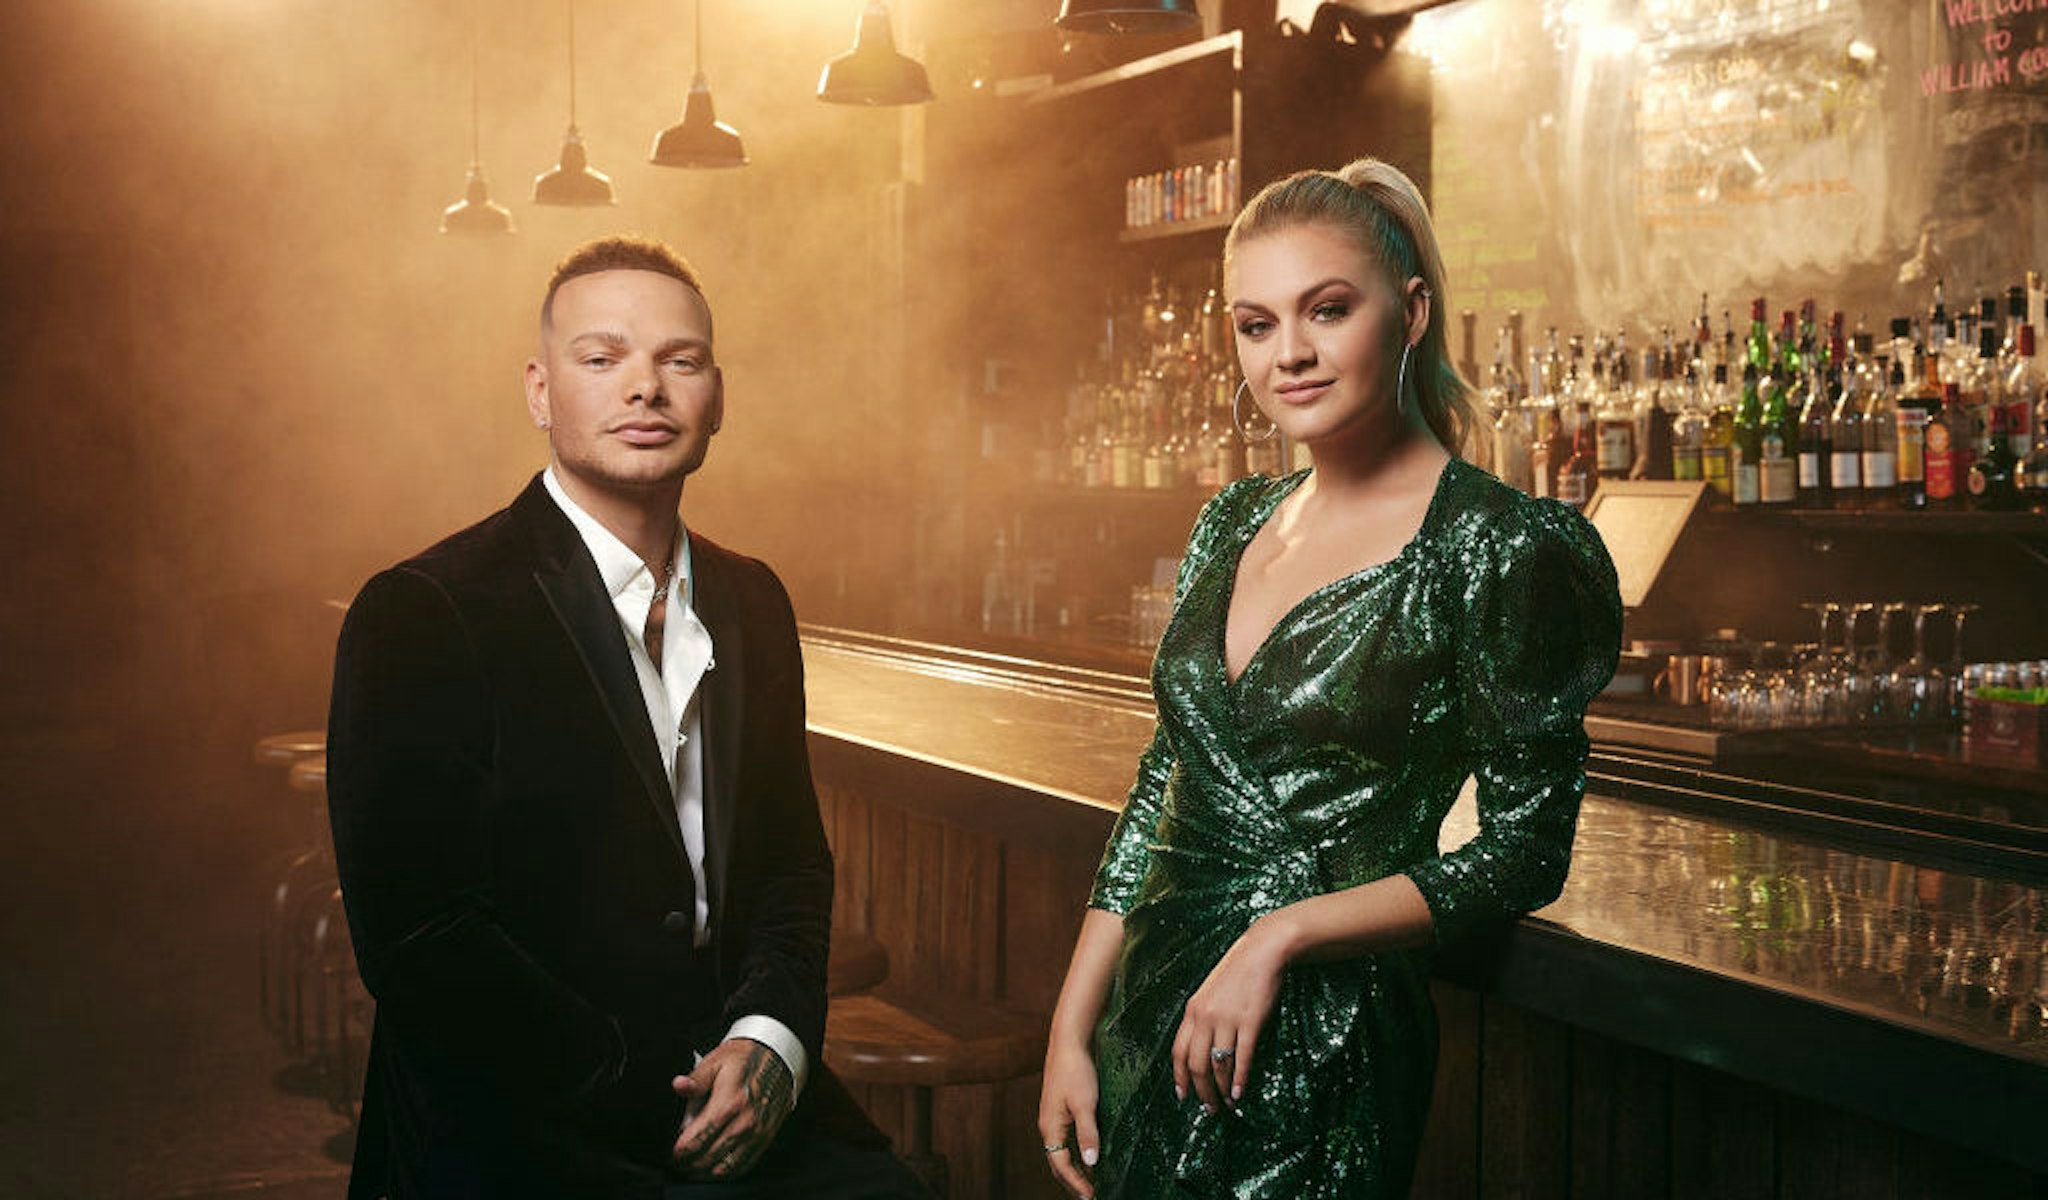 NASHVILLE, TENNESSEE - MAY 12: Kane Brown and Kelsea Ballerini pose during a host promo shoot for the 2021 CMT Music Awards on May 12, 2021 in Nashville, Tennessee. (Photo by John Shearer/2021 CMT Awards/Getty Images for CMT)